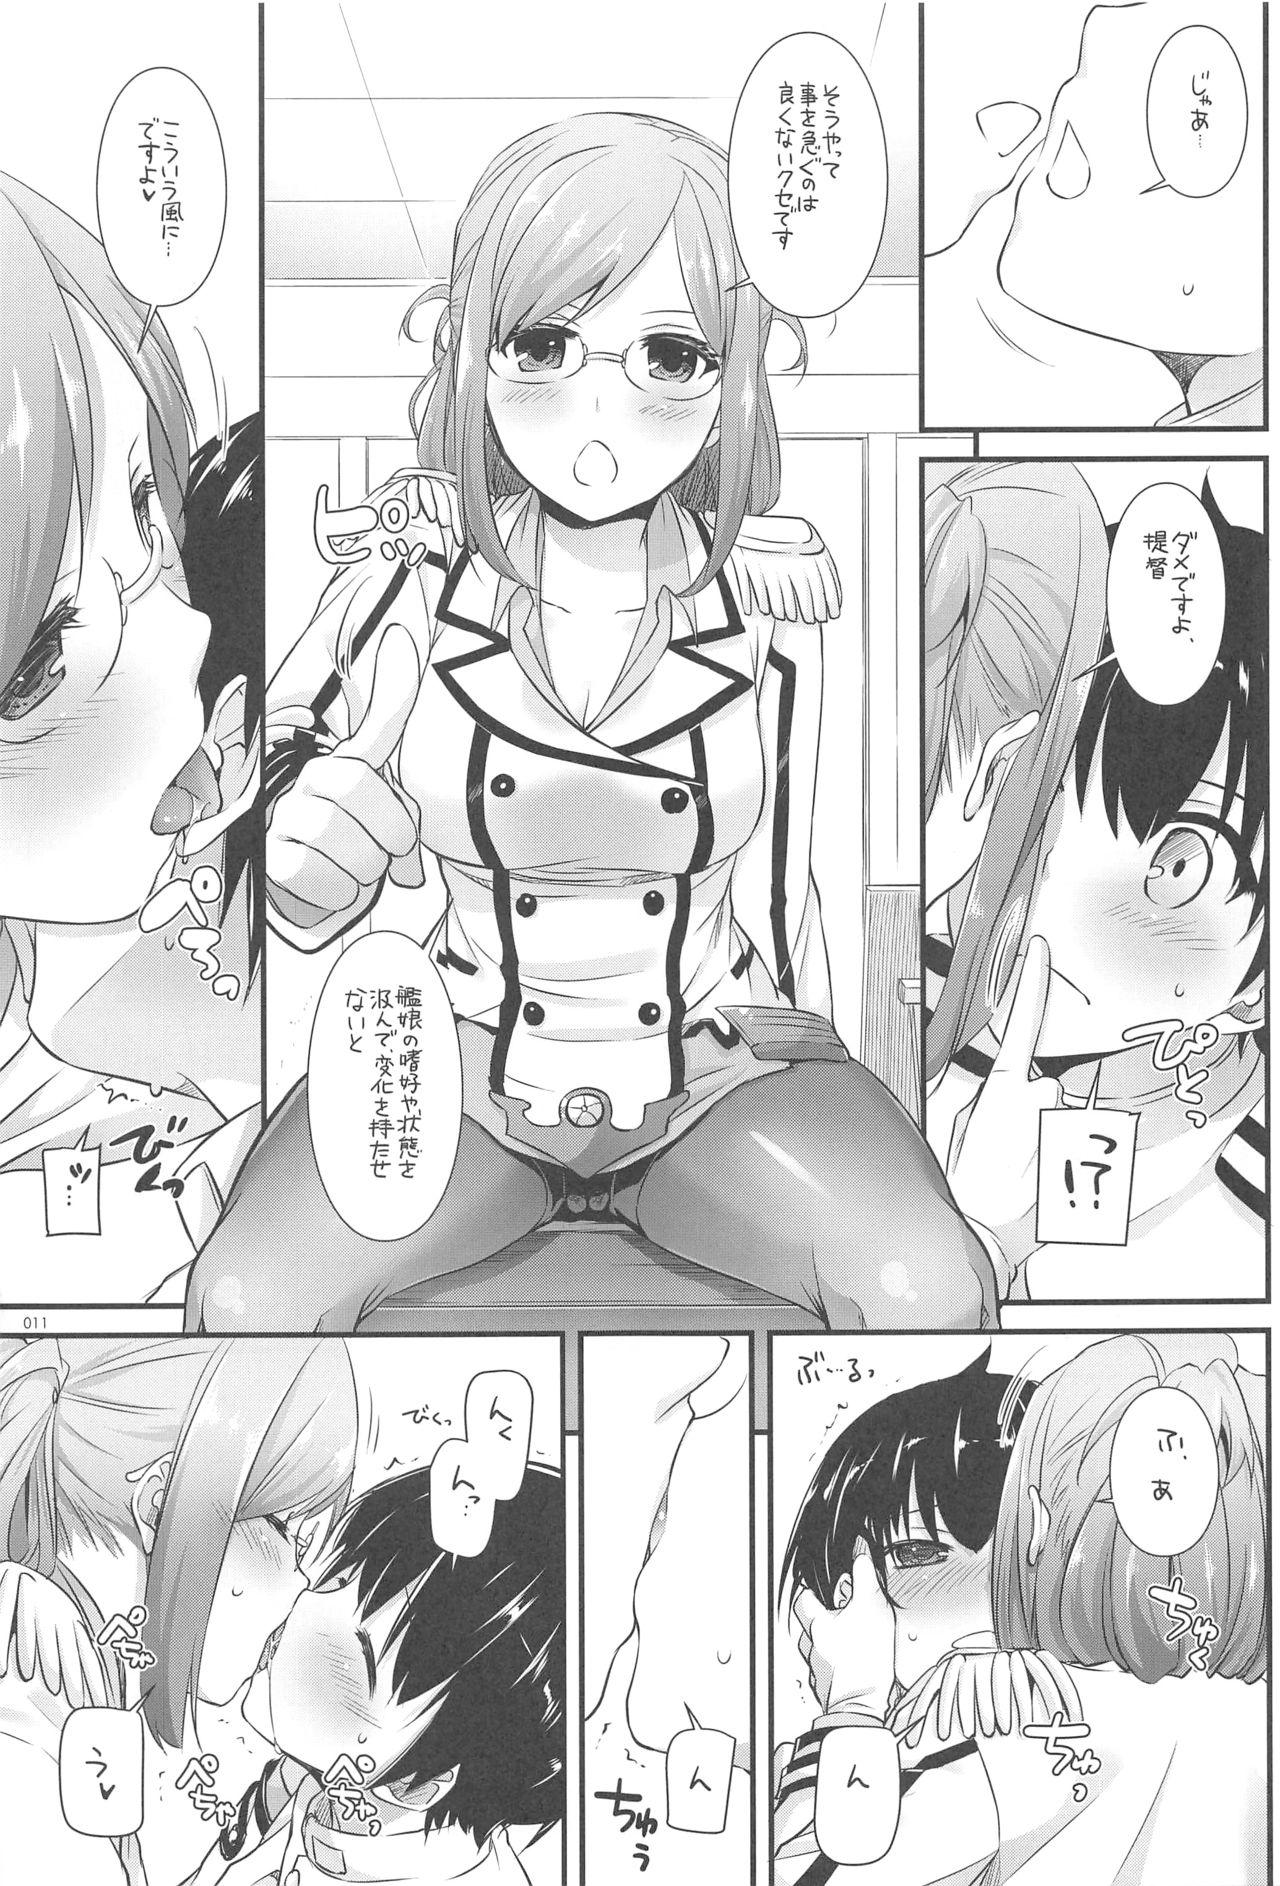 Best Blowjob Ever DL - Kanmusu Soushuuhen 03 - Kantai collection Mother fuck - Page 10